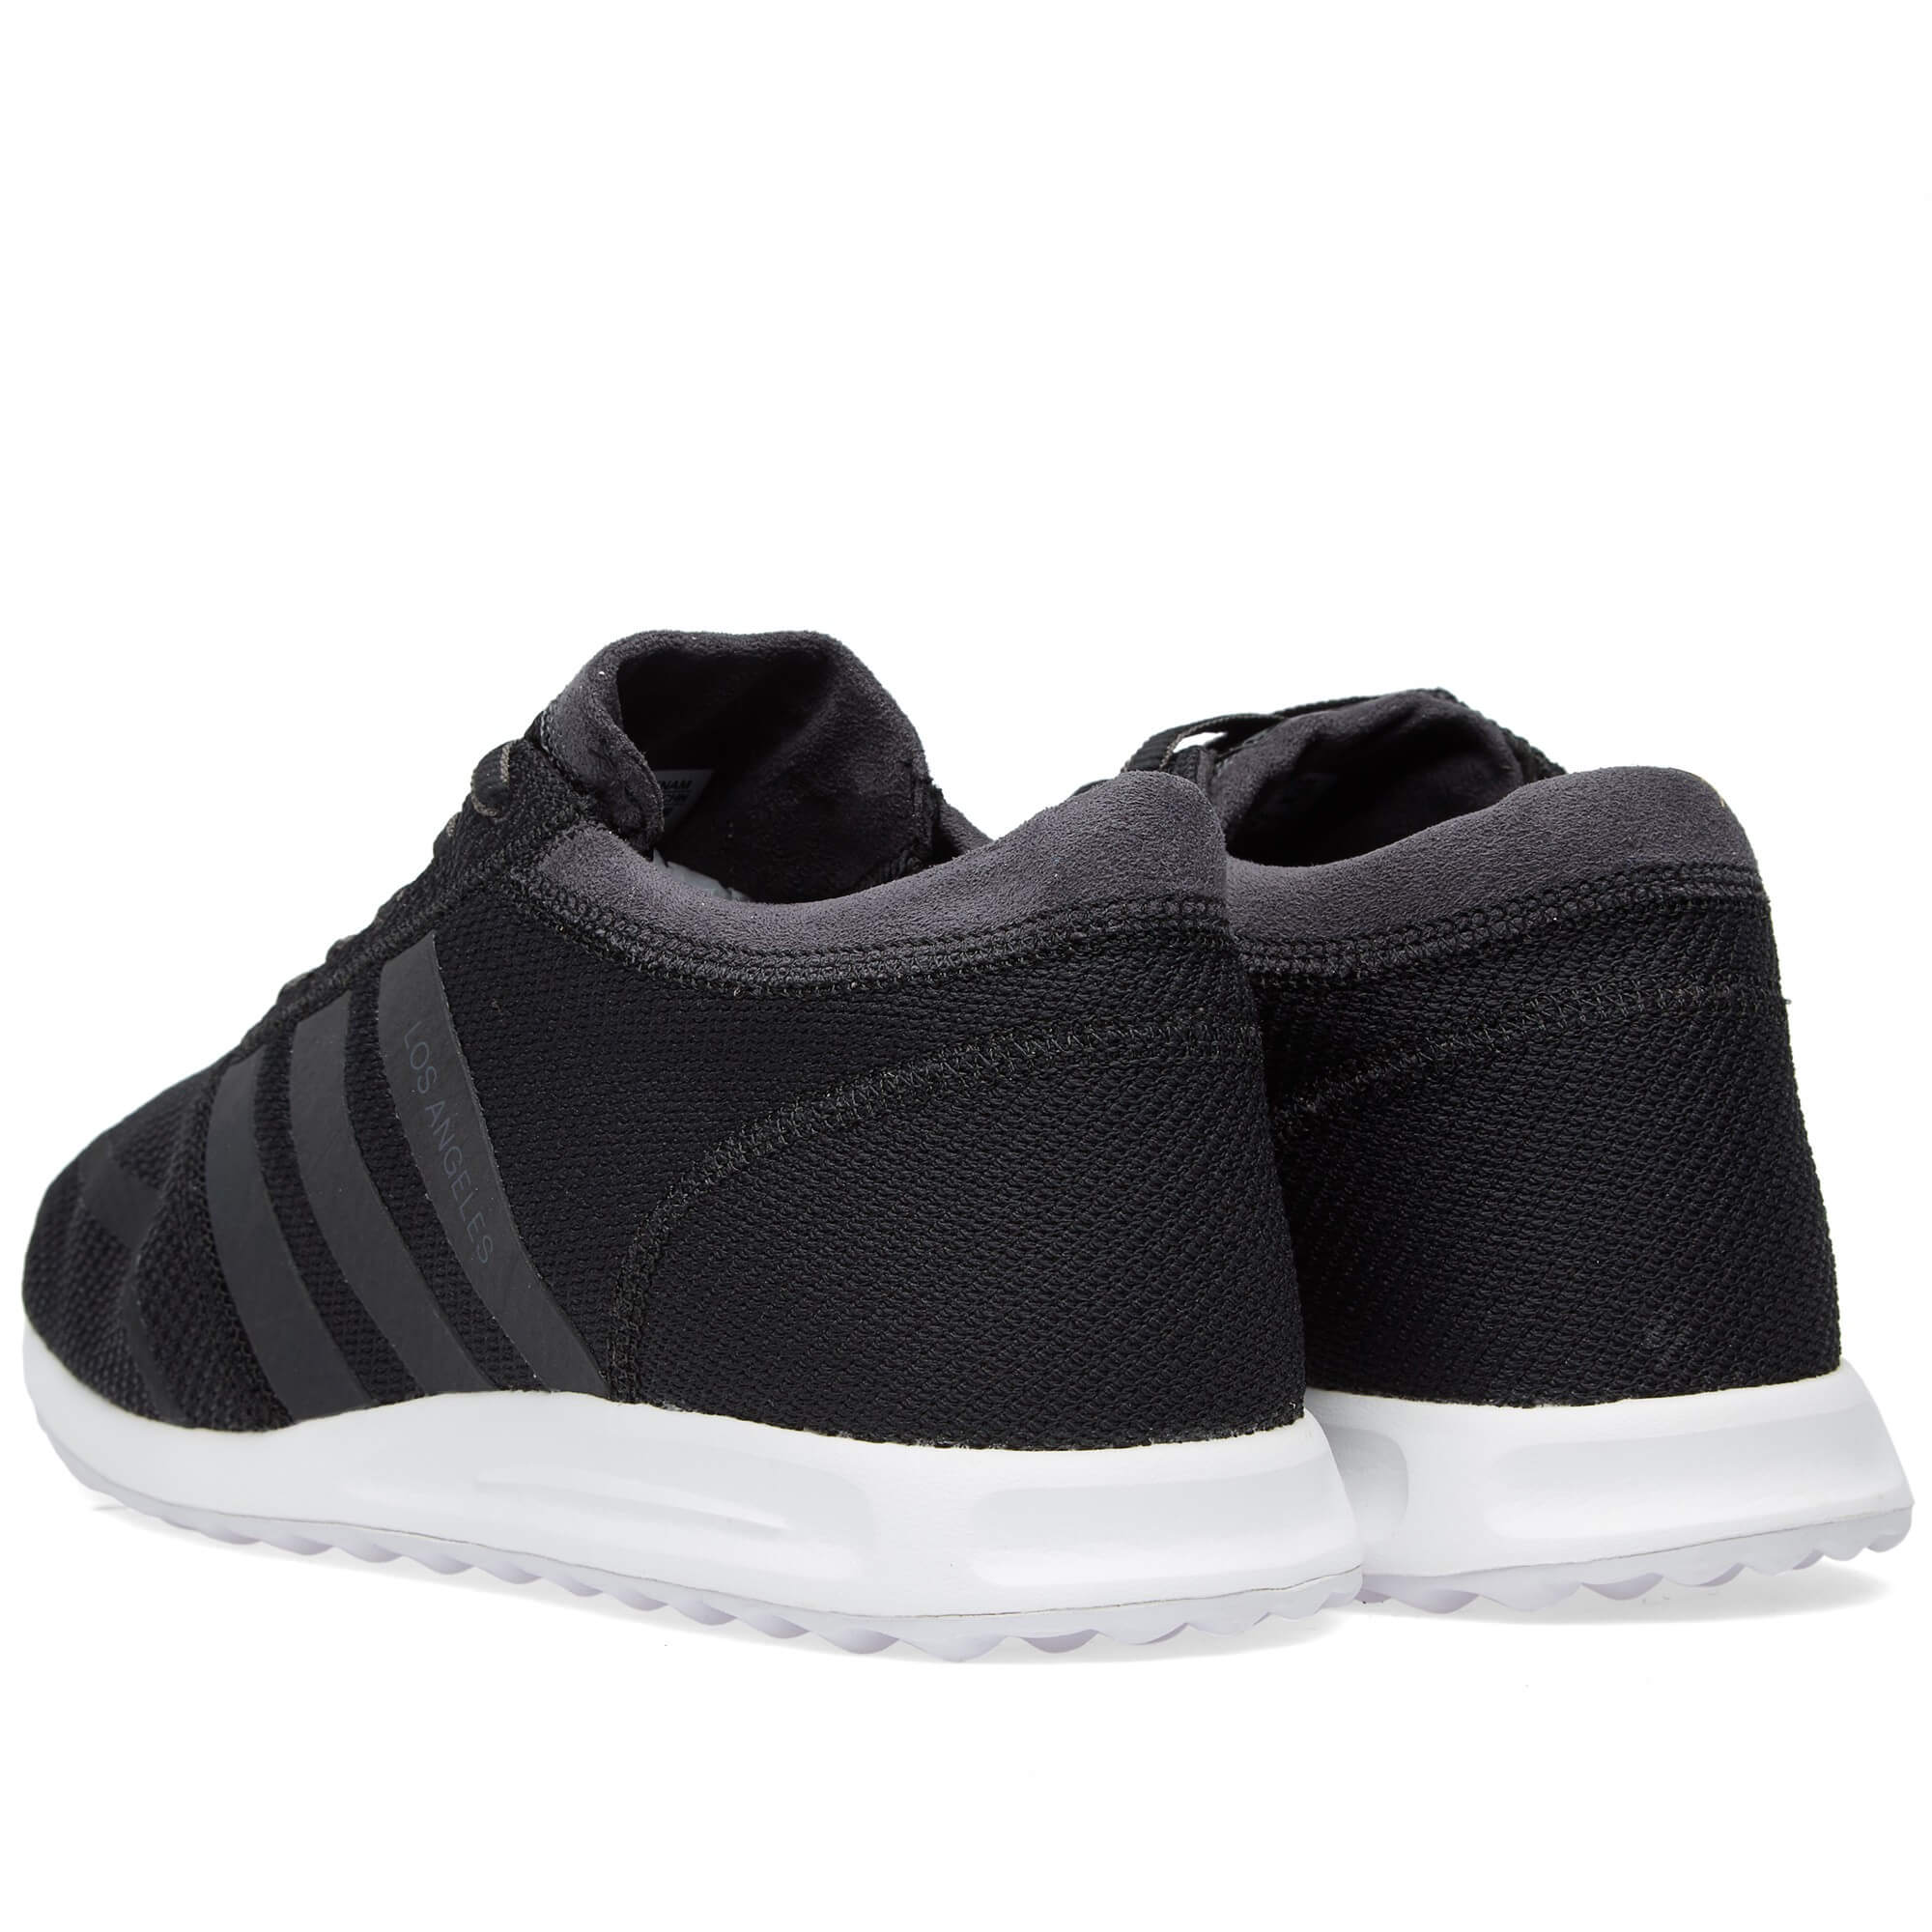 adidas Los Angeles Core Black White | Where To Buy | TBC | The Sole Supplier